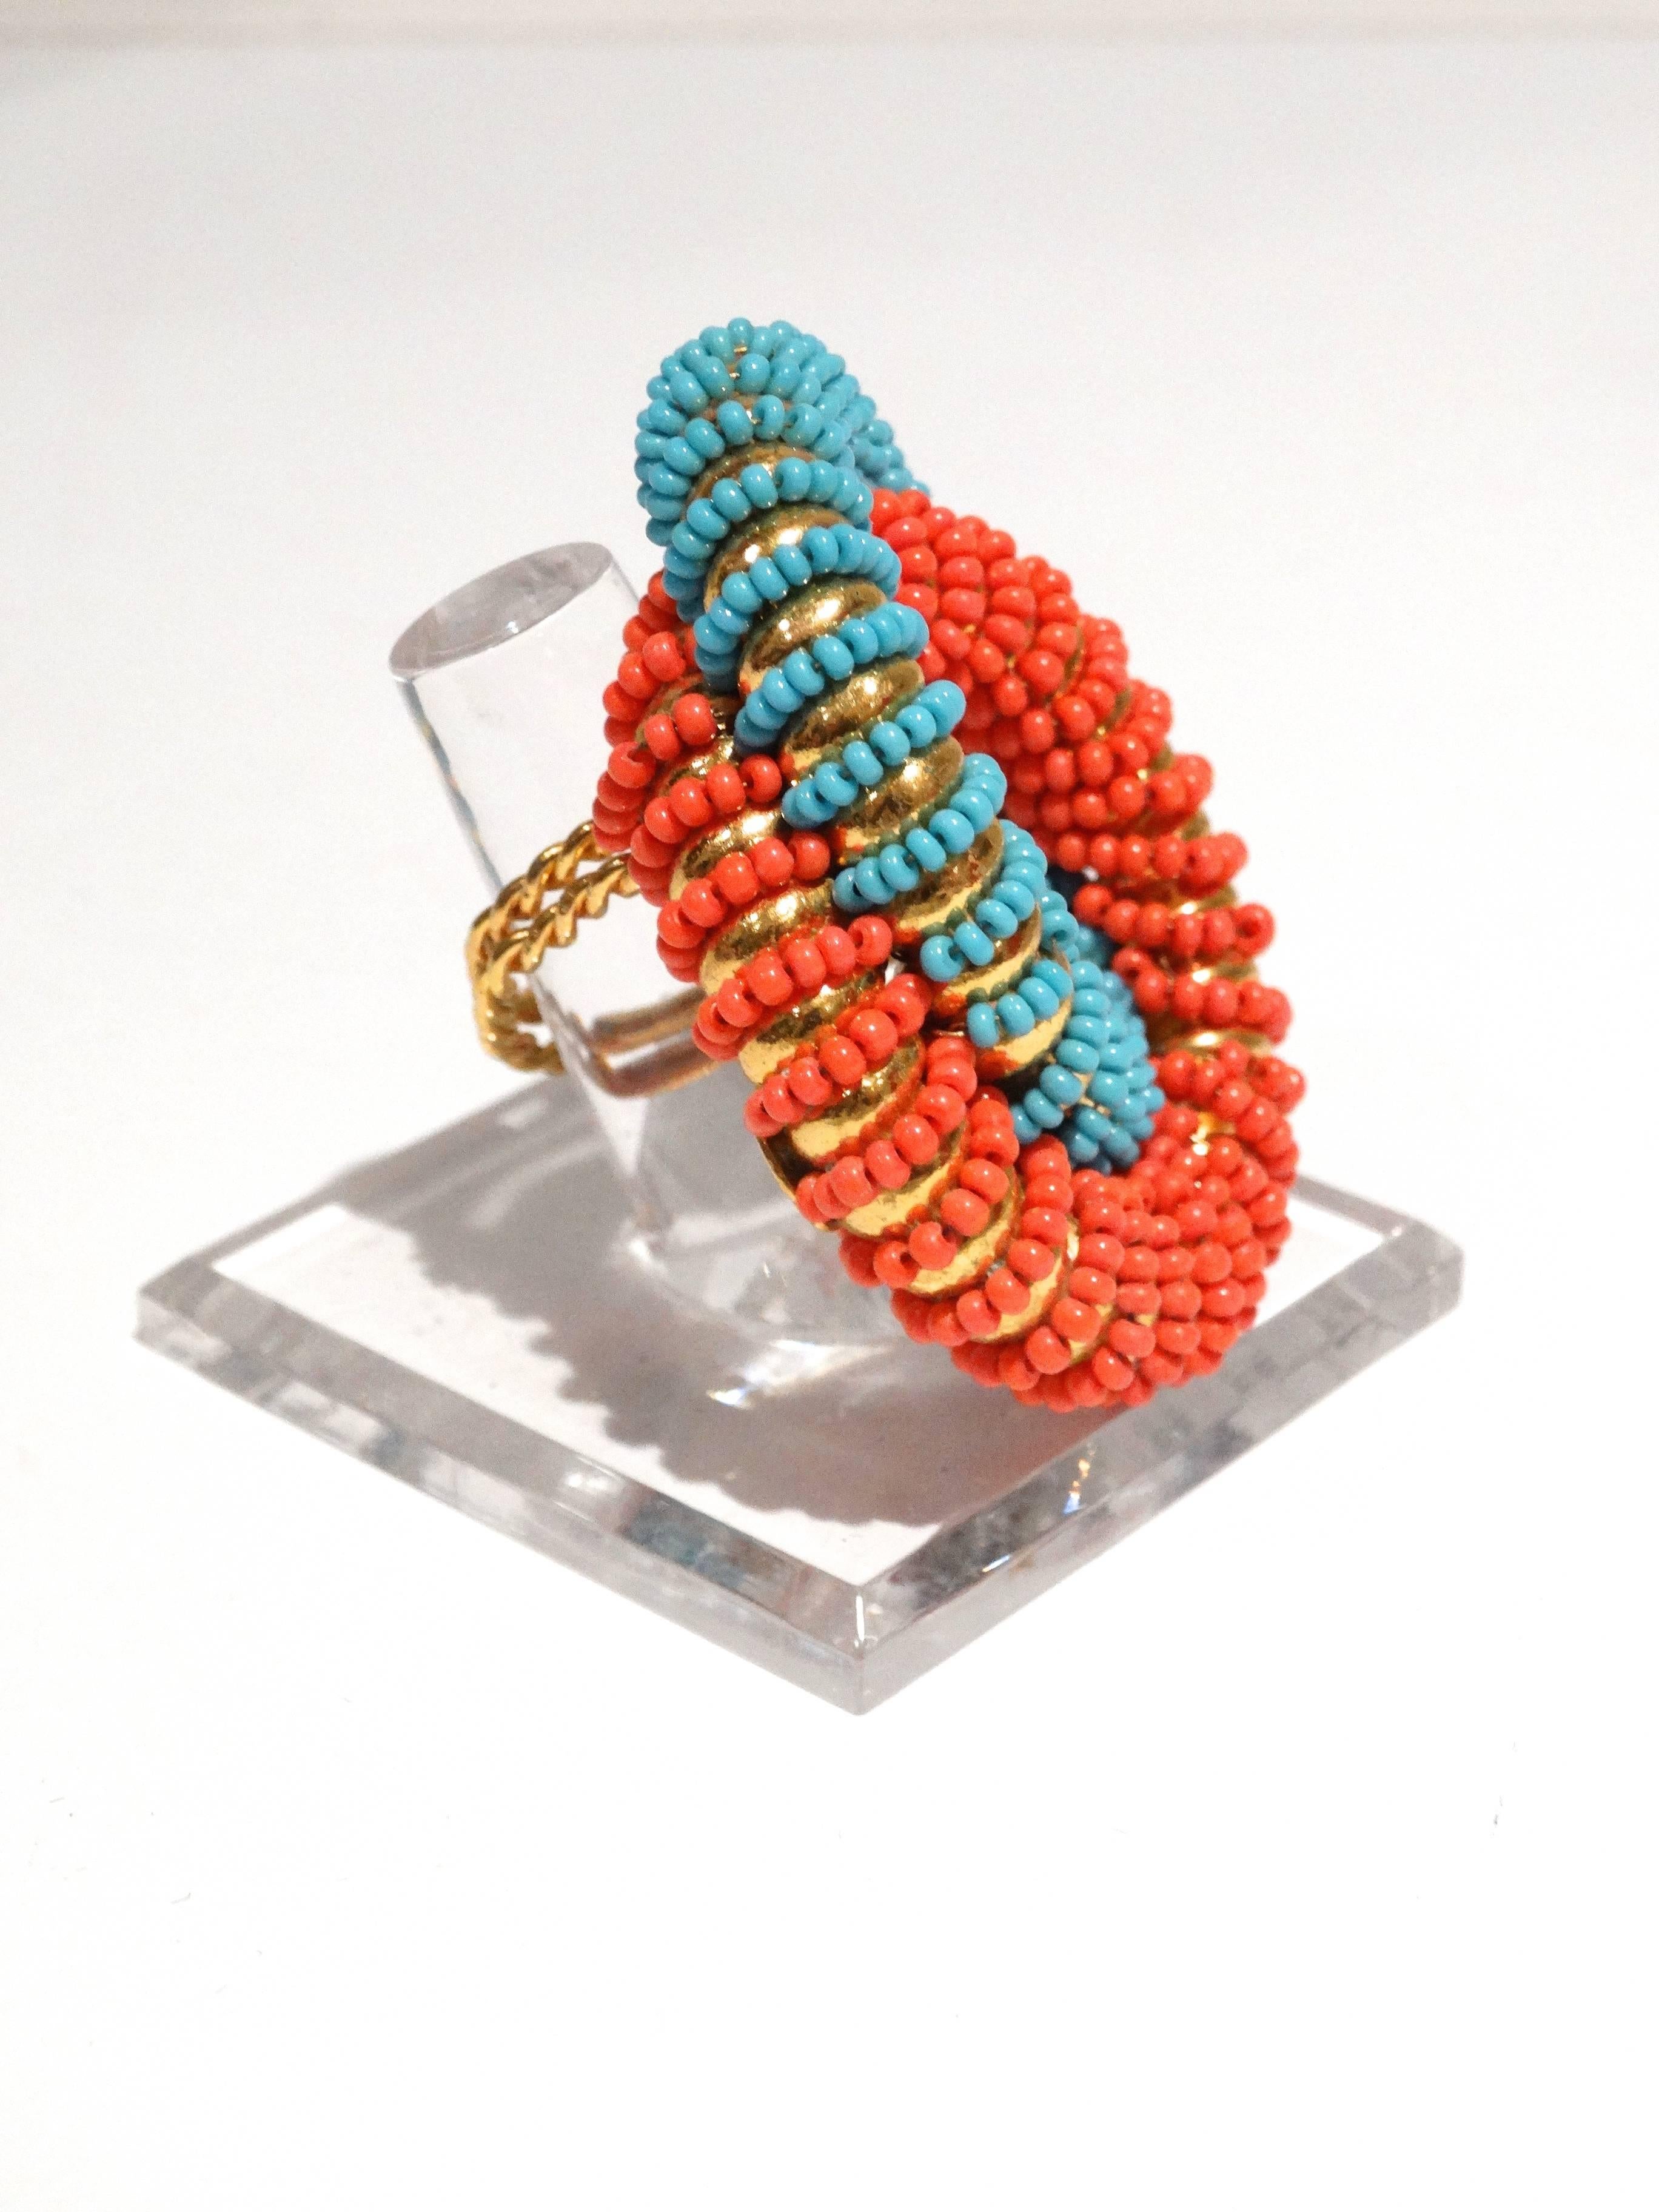 This fabulous ring designed by William De Lillo is with two-connected circles. The circles feature faux beads in coral and turquoise colors that spiral around each circle. Great color combo, in turquoise and coral. This ring is a unique double